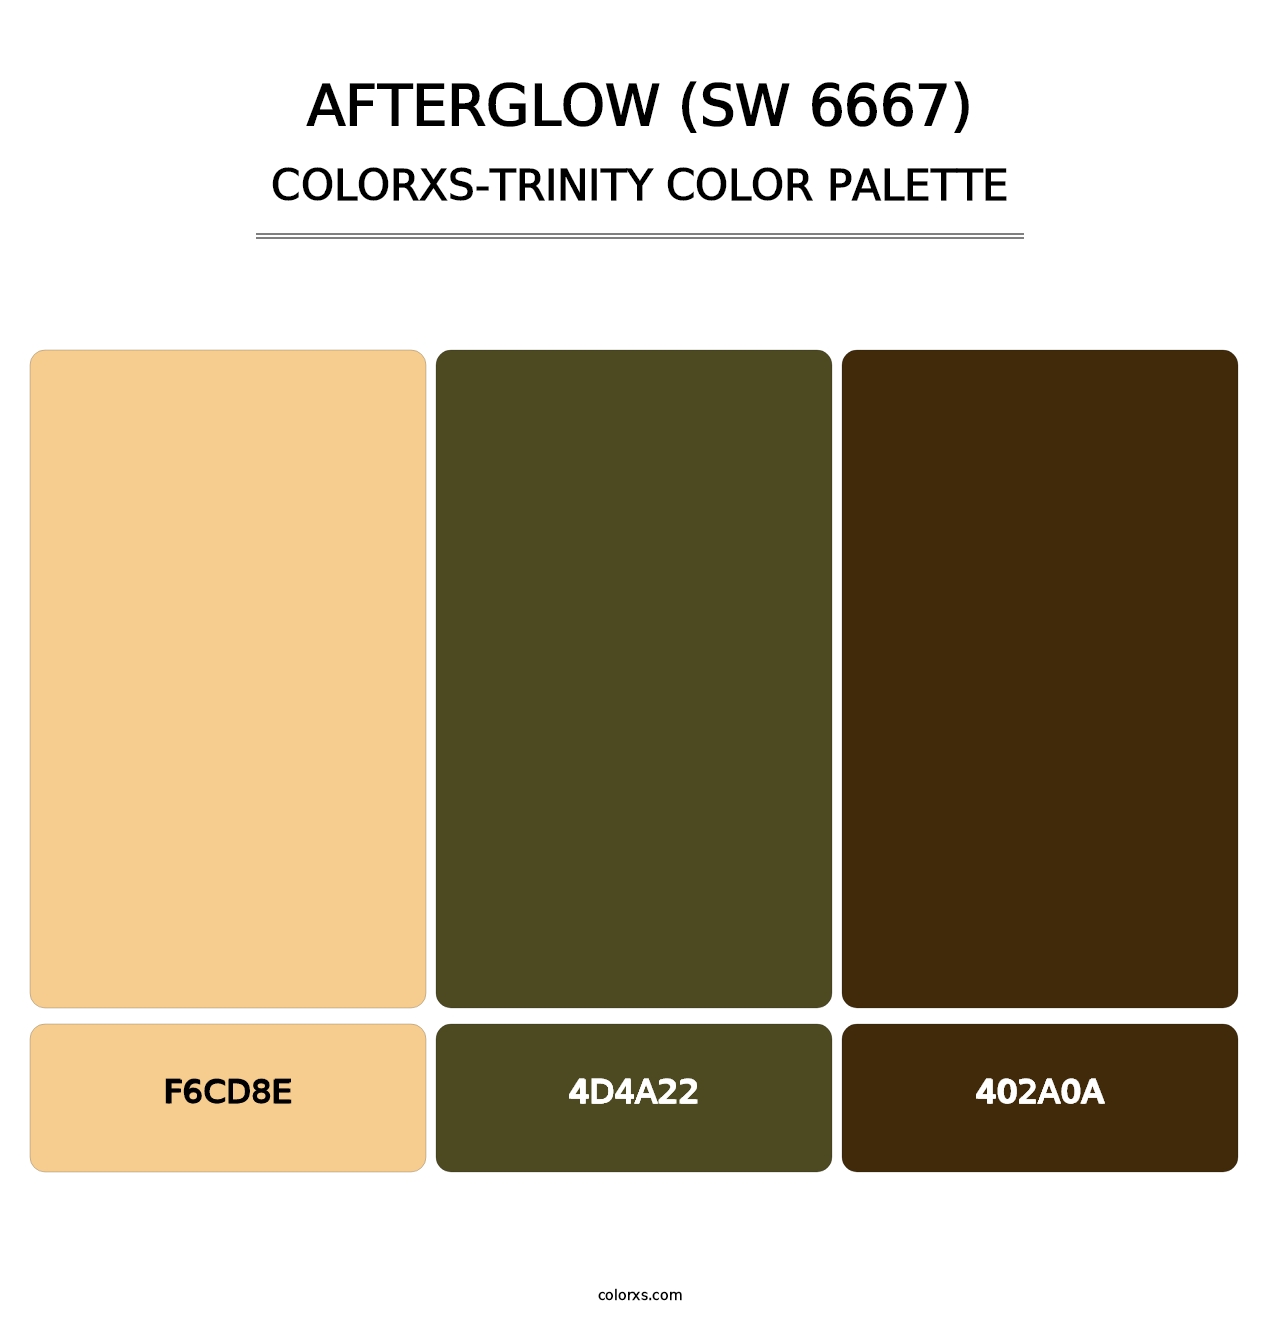 Afterglow (SW 6667) - Colorxs Trinity Palette